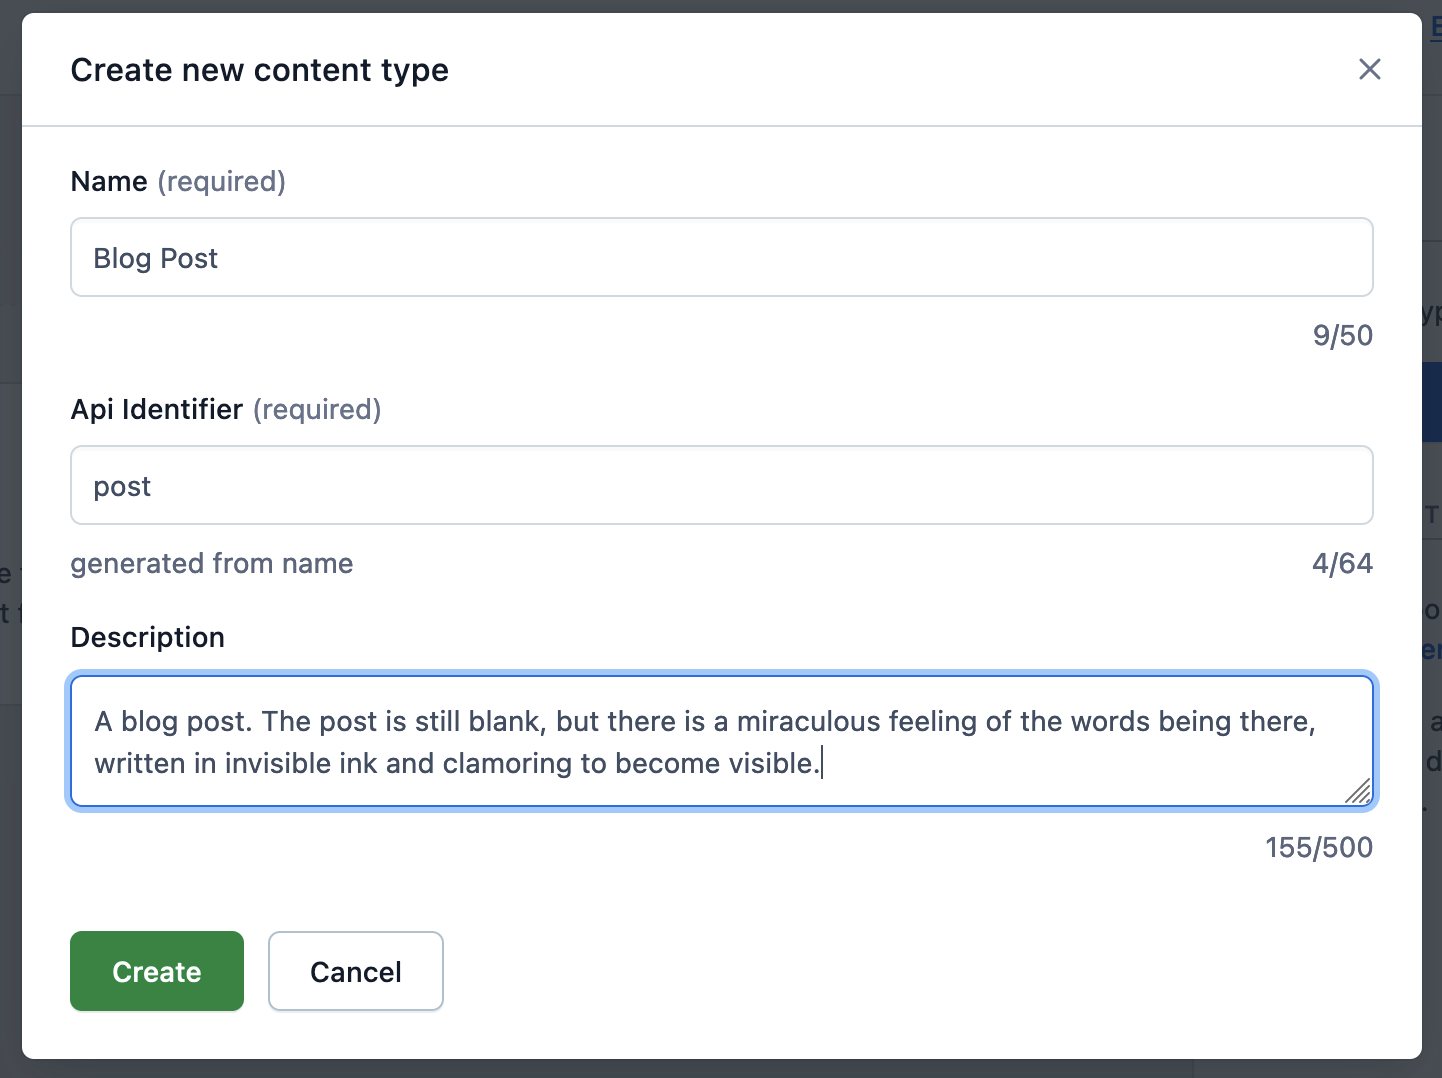 A user interface showing the creation of a new content type in Contentful